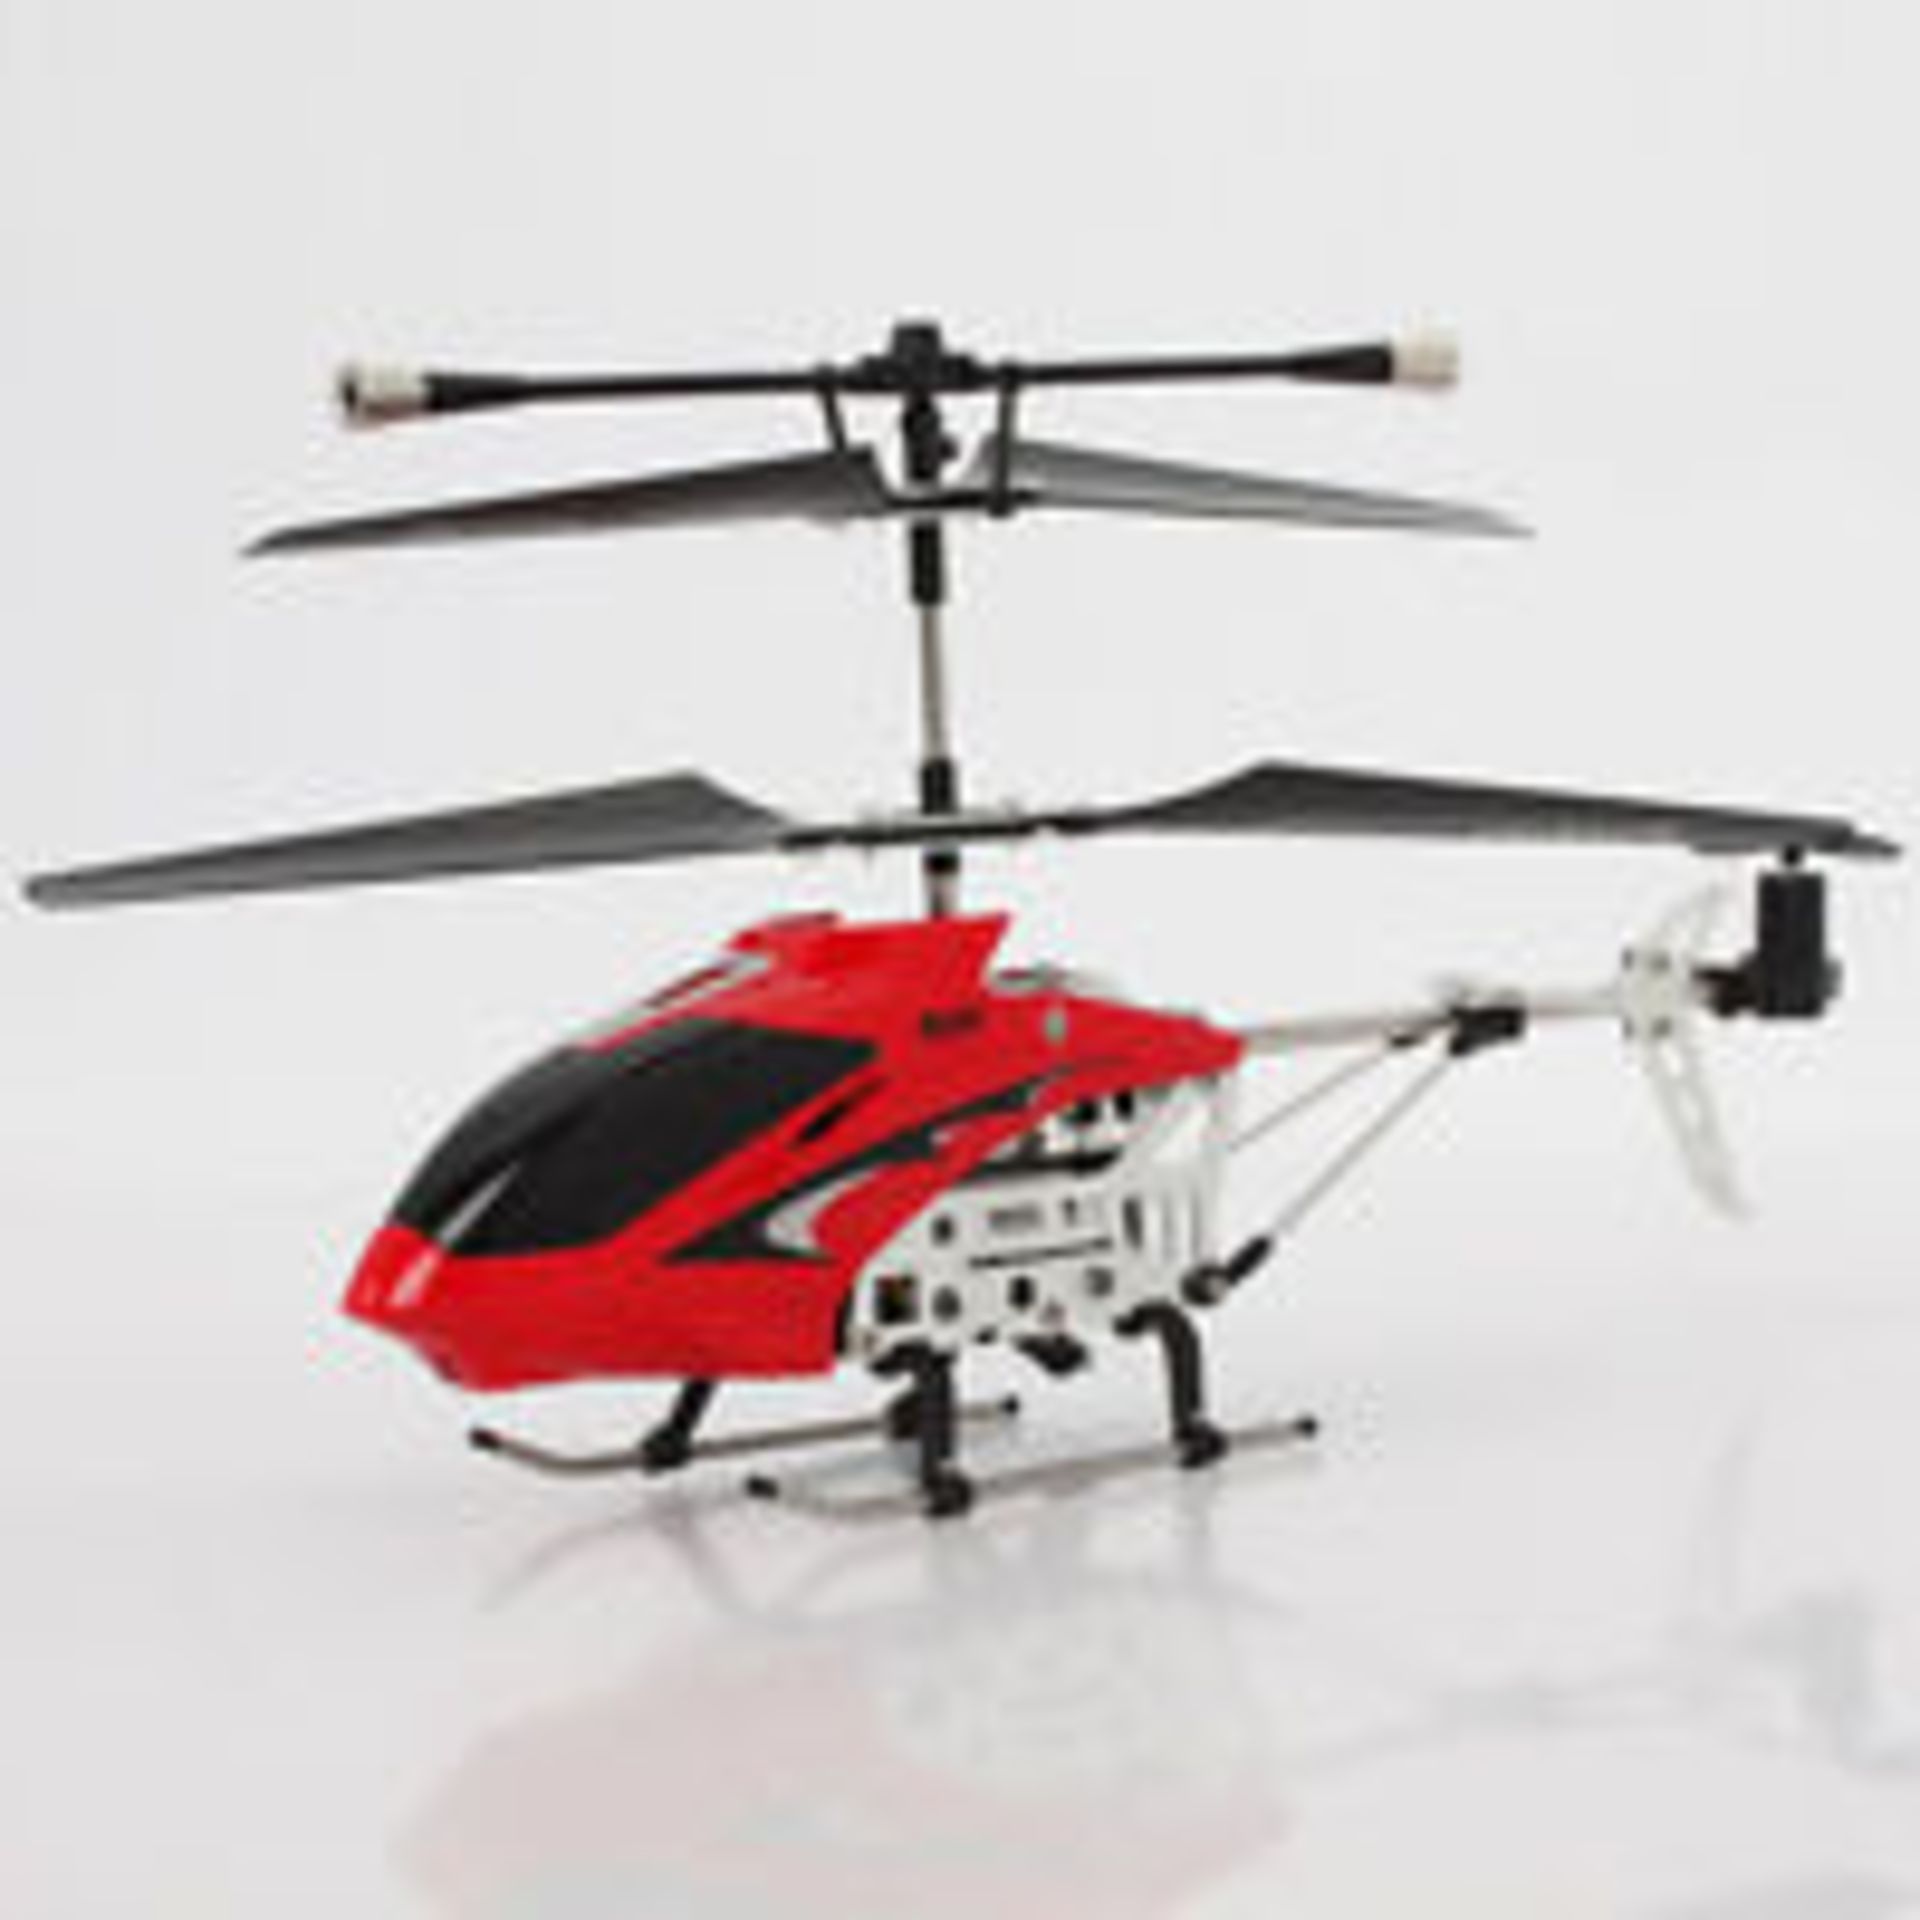 V Brand New Infra-Red 3.5 Channel Flying Camera Spy Helicopter - Built In Video And Photo Camera -